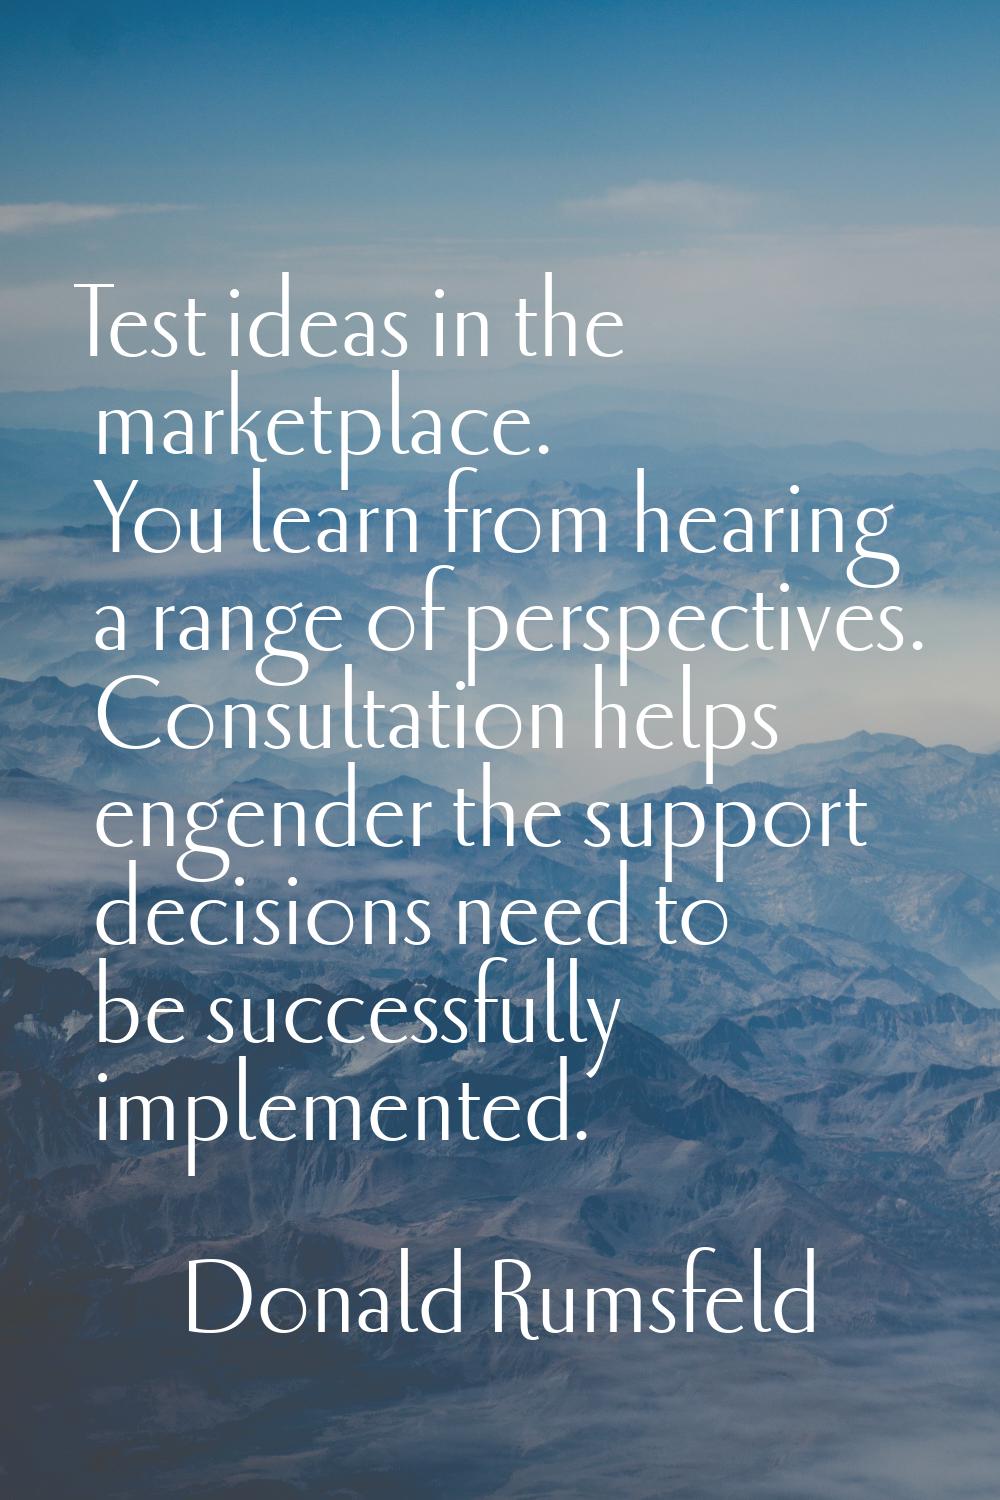 Test ideas in the marketplace. You learn from hearing a range of perspectives. Consultation helps e